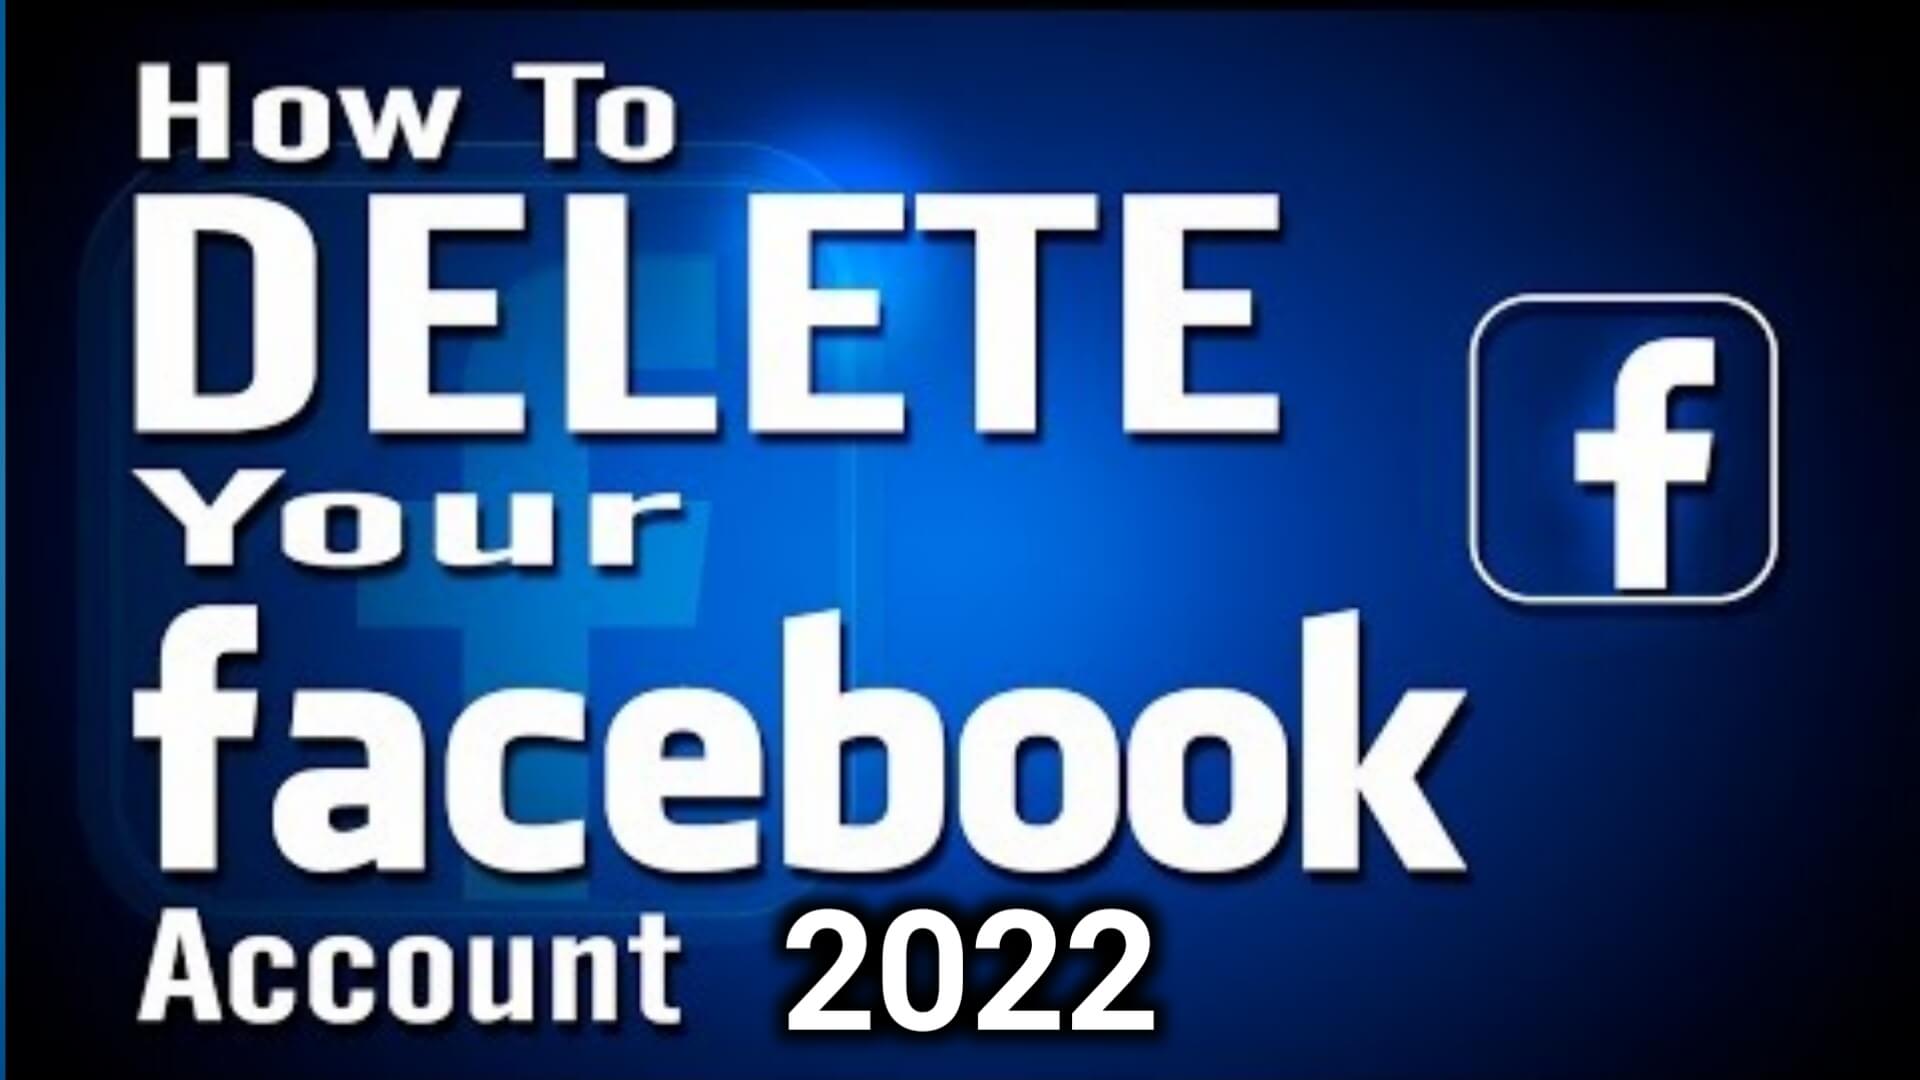 How to Facebook account delete